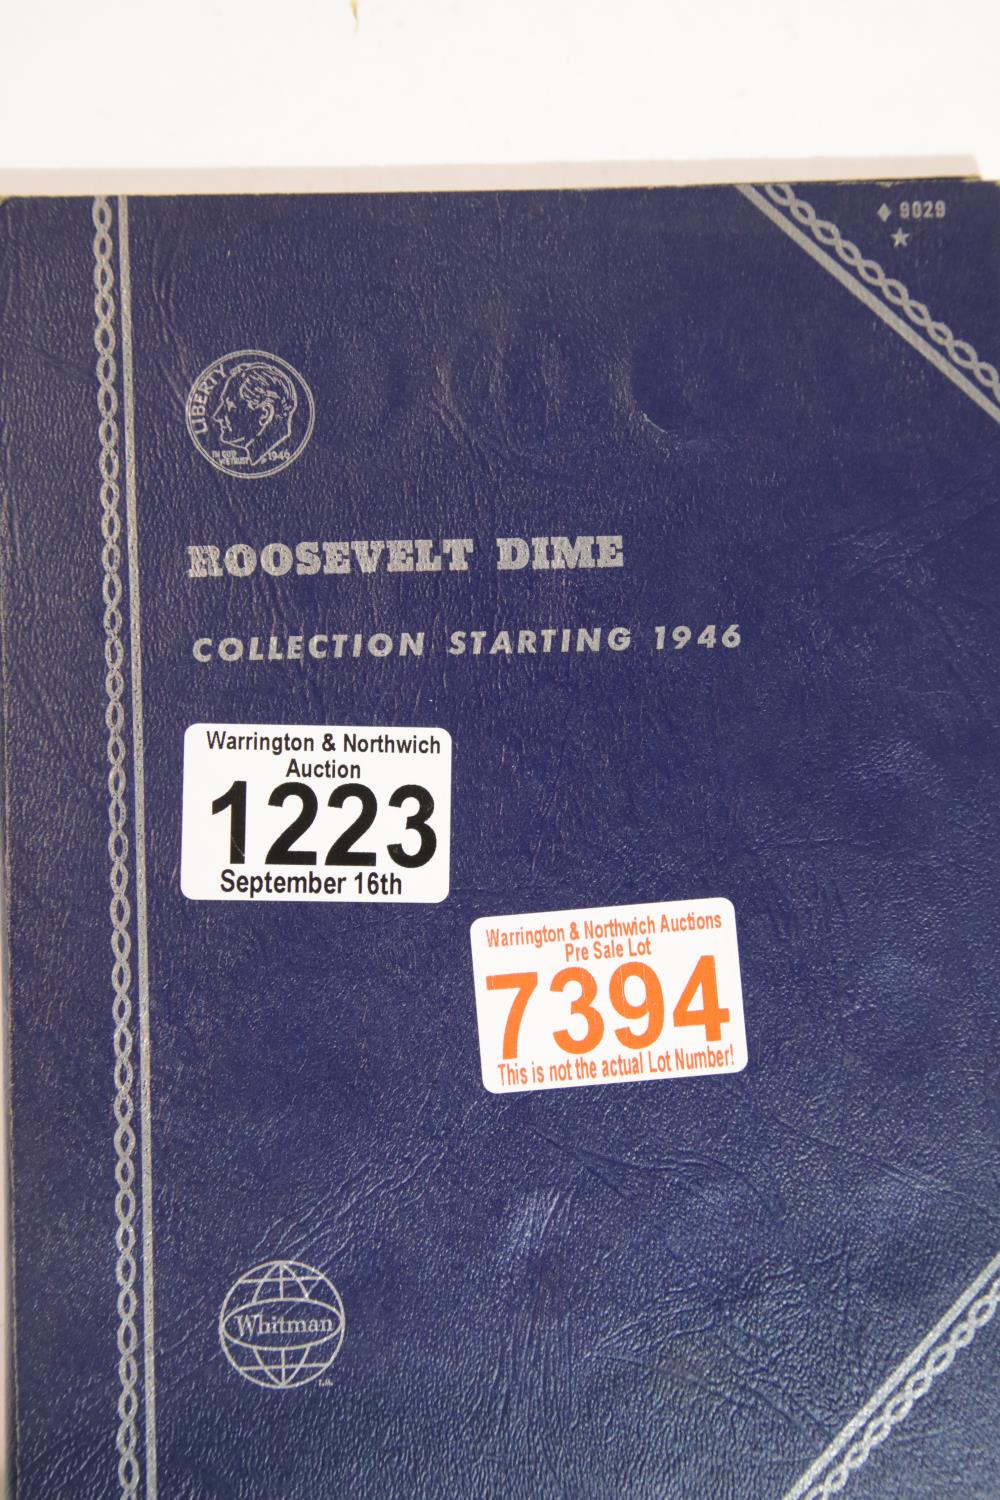 Whitman folder of Roosevelt dimes, 54 coins. P&P Group 1 (£14+VAT for the first lot and £1+VAT for